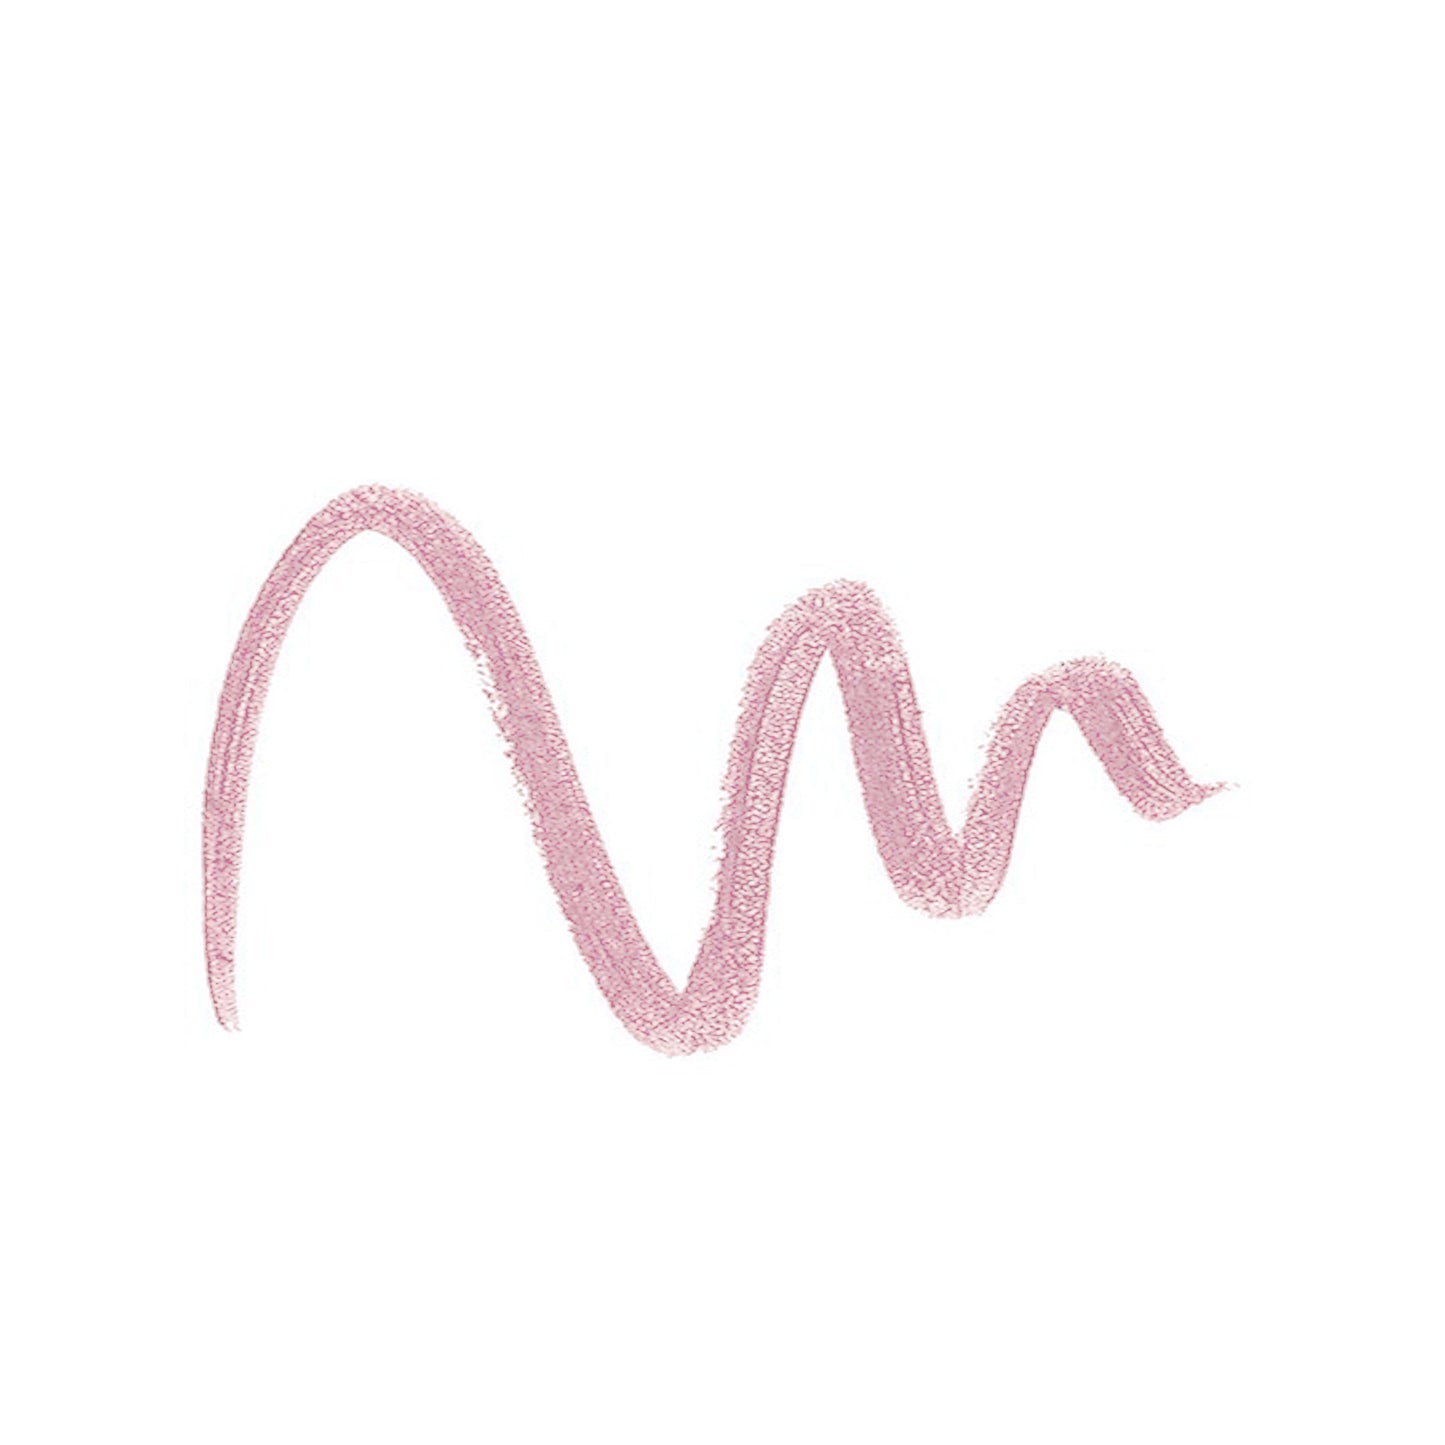 Dlux Make Up Pro Gel liners - Pinky Milk